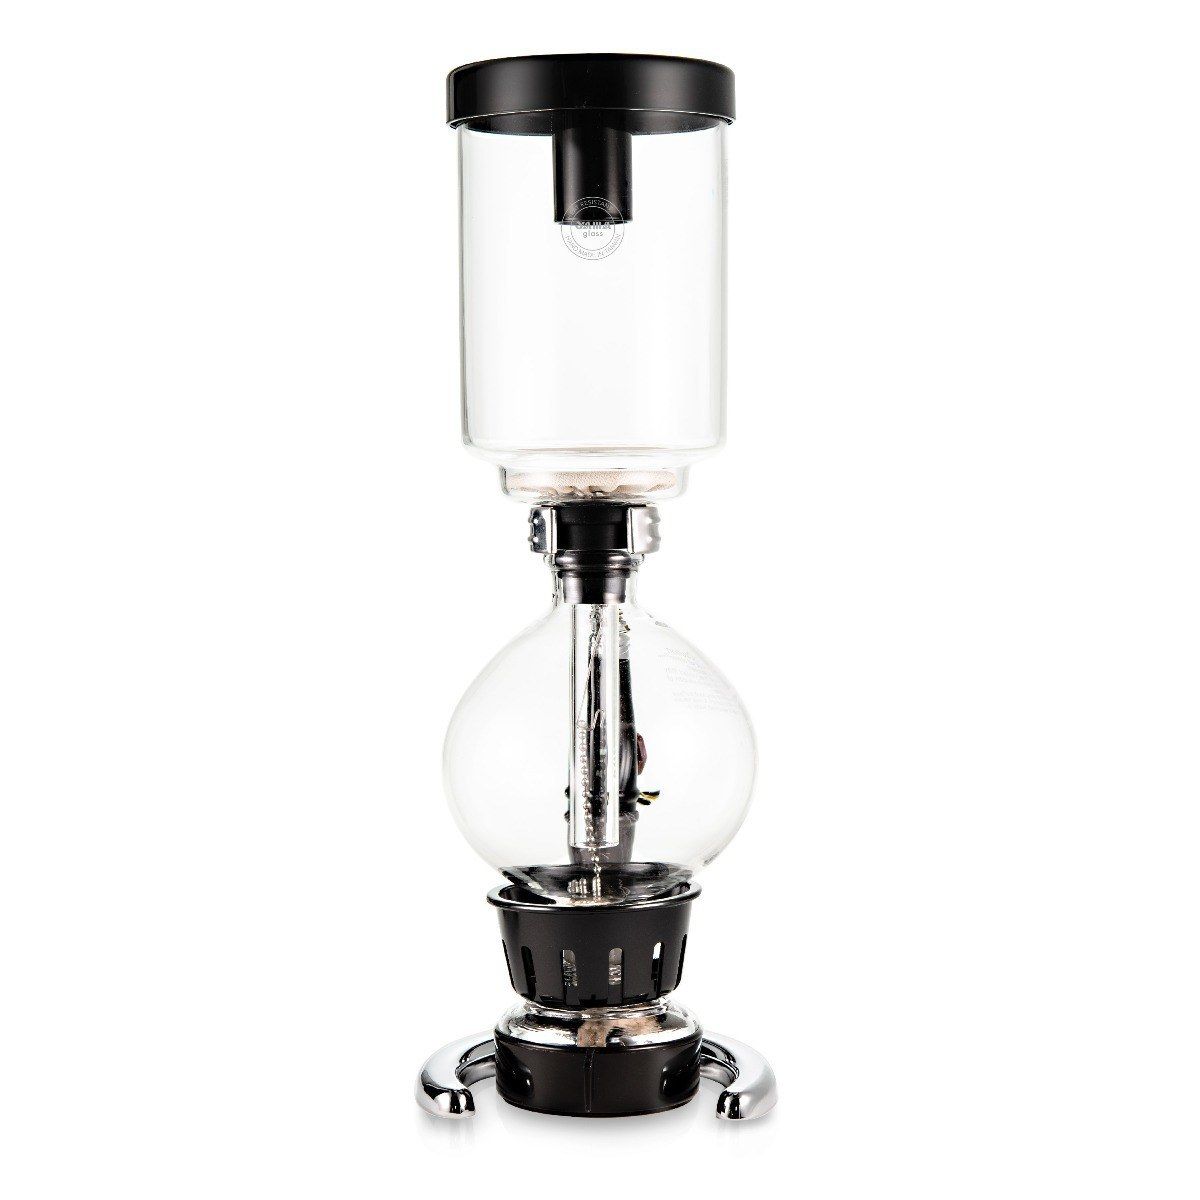 LOEFF&LEE 5 Espresso Cups - Siphon Coffee Maker with MicroBurner (Tabletop  Syphon Coffee Brewer - 600ml)